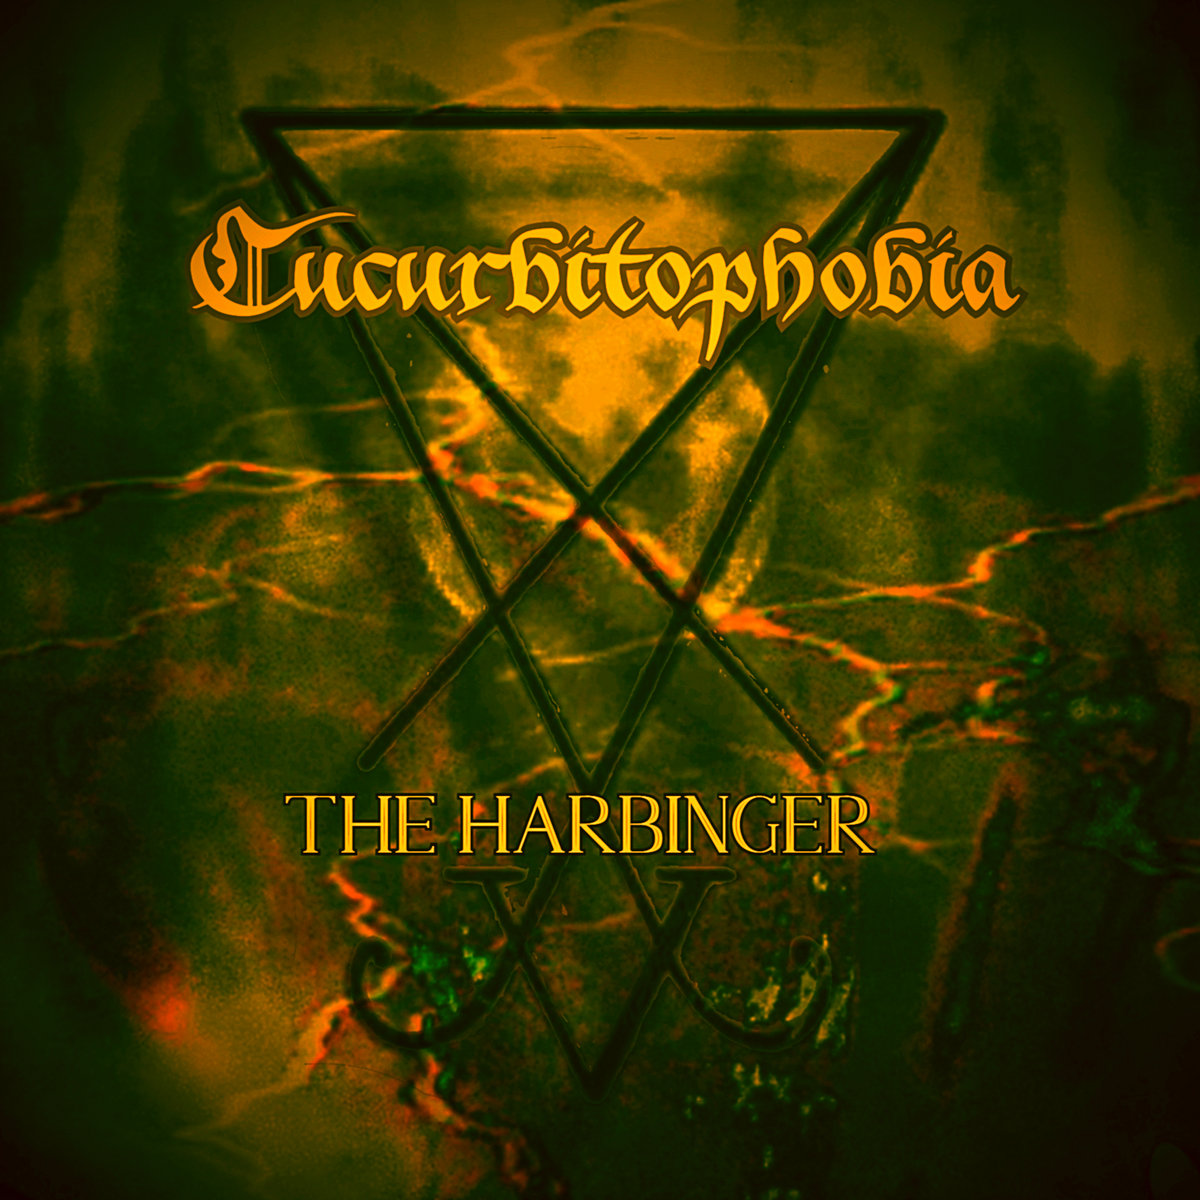 tbm horror experts - metal - cucurbituphobia - Tapestries of Terror. That record introduced a dark and cinematic sound inspired by the